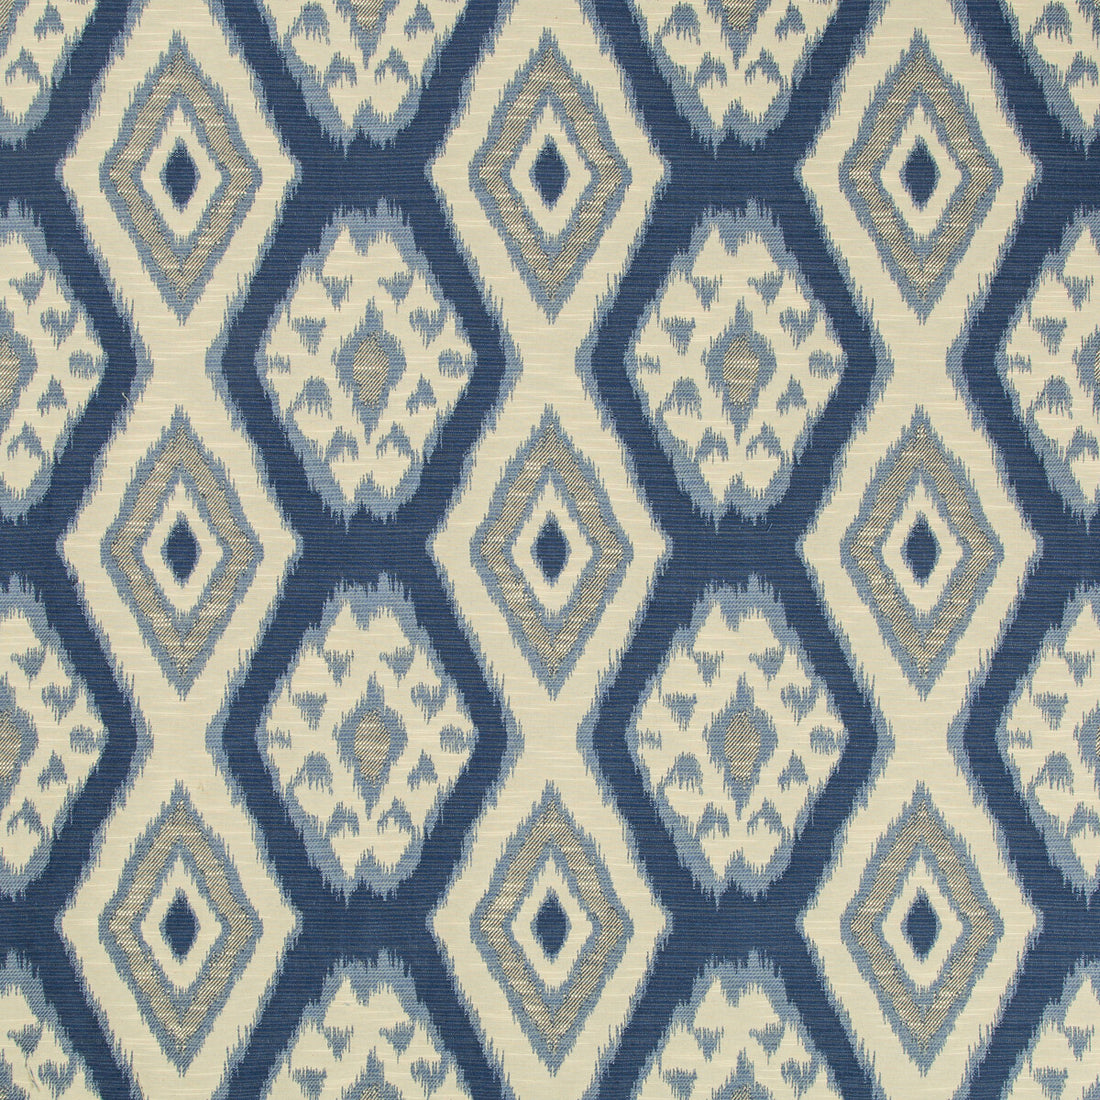 Rigi fabric in ink color - pattern 32790.516.0 - by Kravet Basics in the Thom Filicia collection